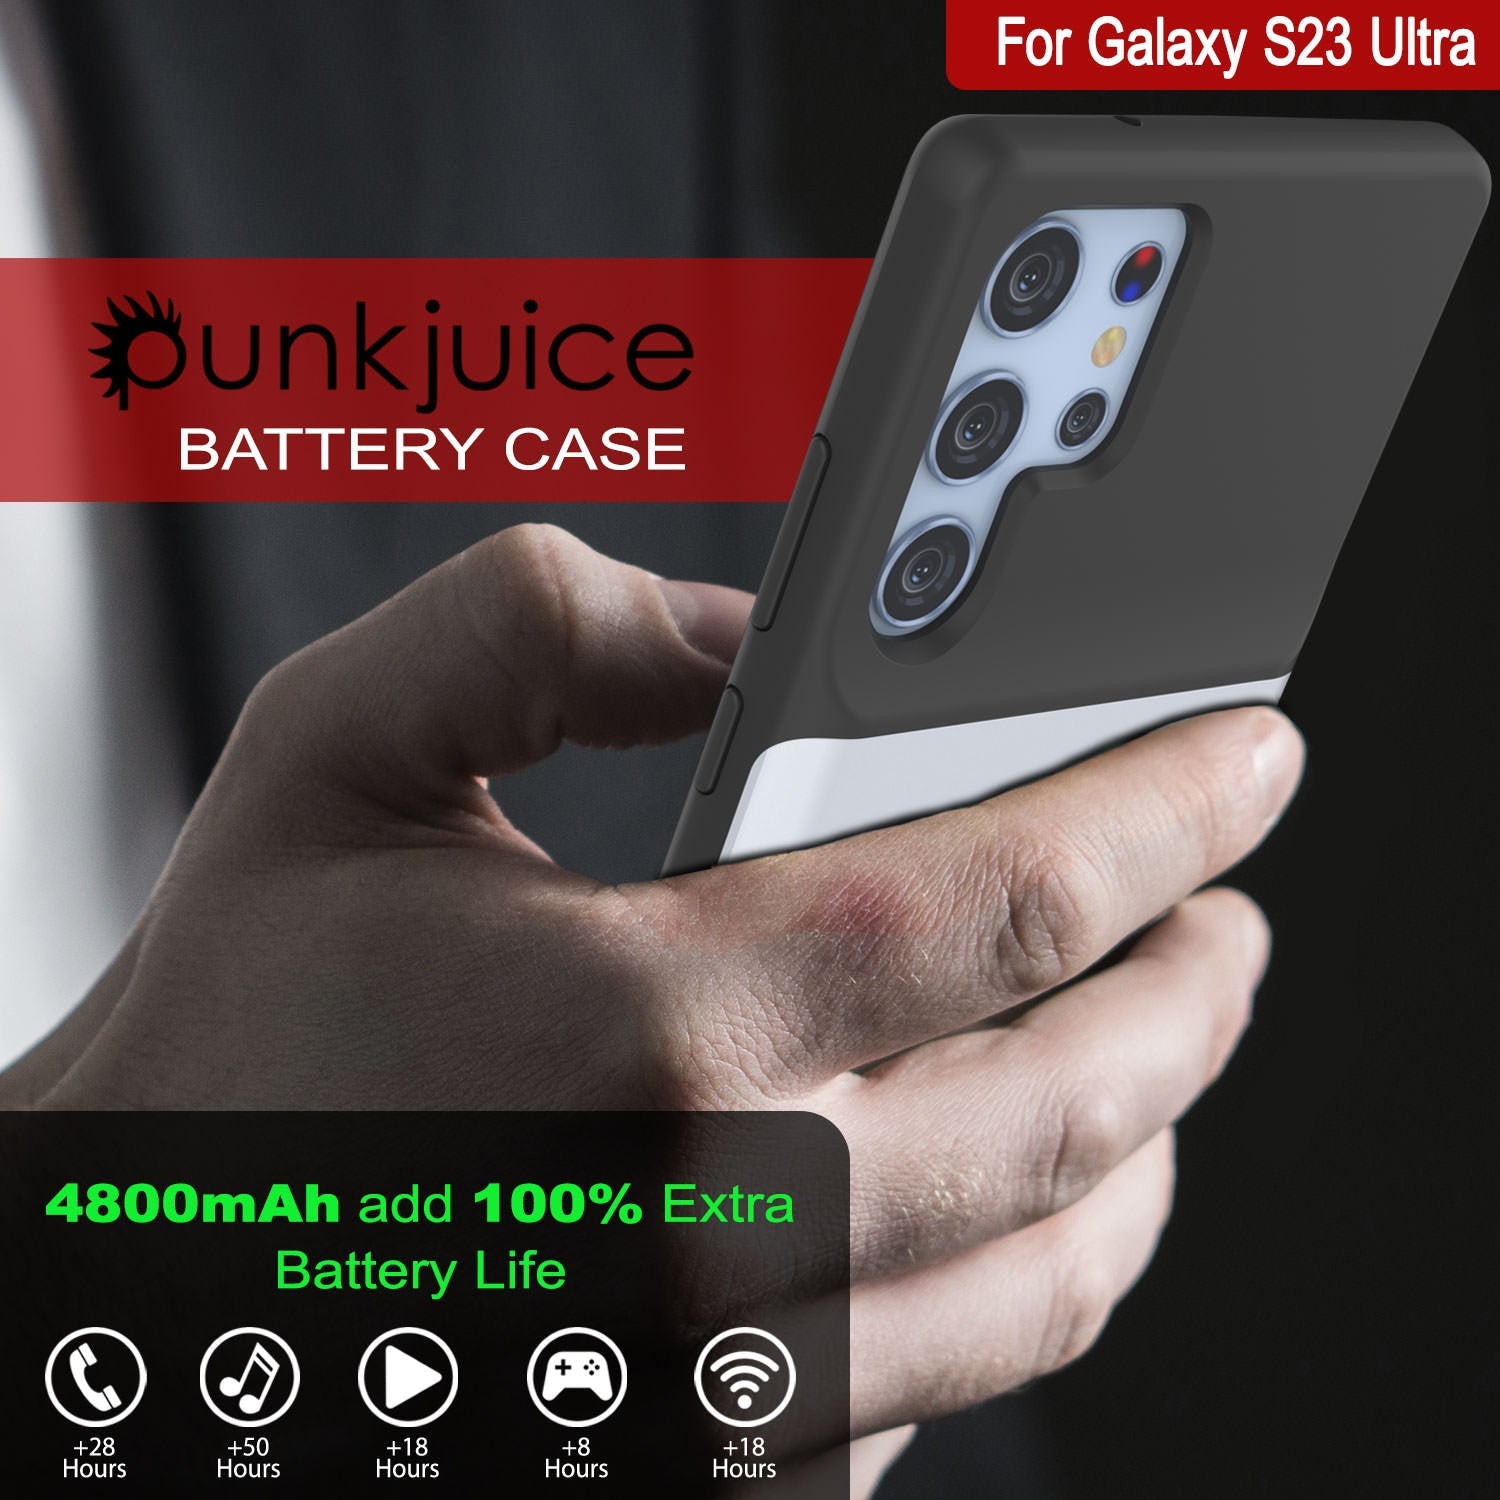 PunkJuice S24 Battery Case White - Portable Charging Power Juice Bank with 4500mAh